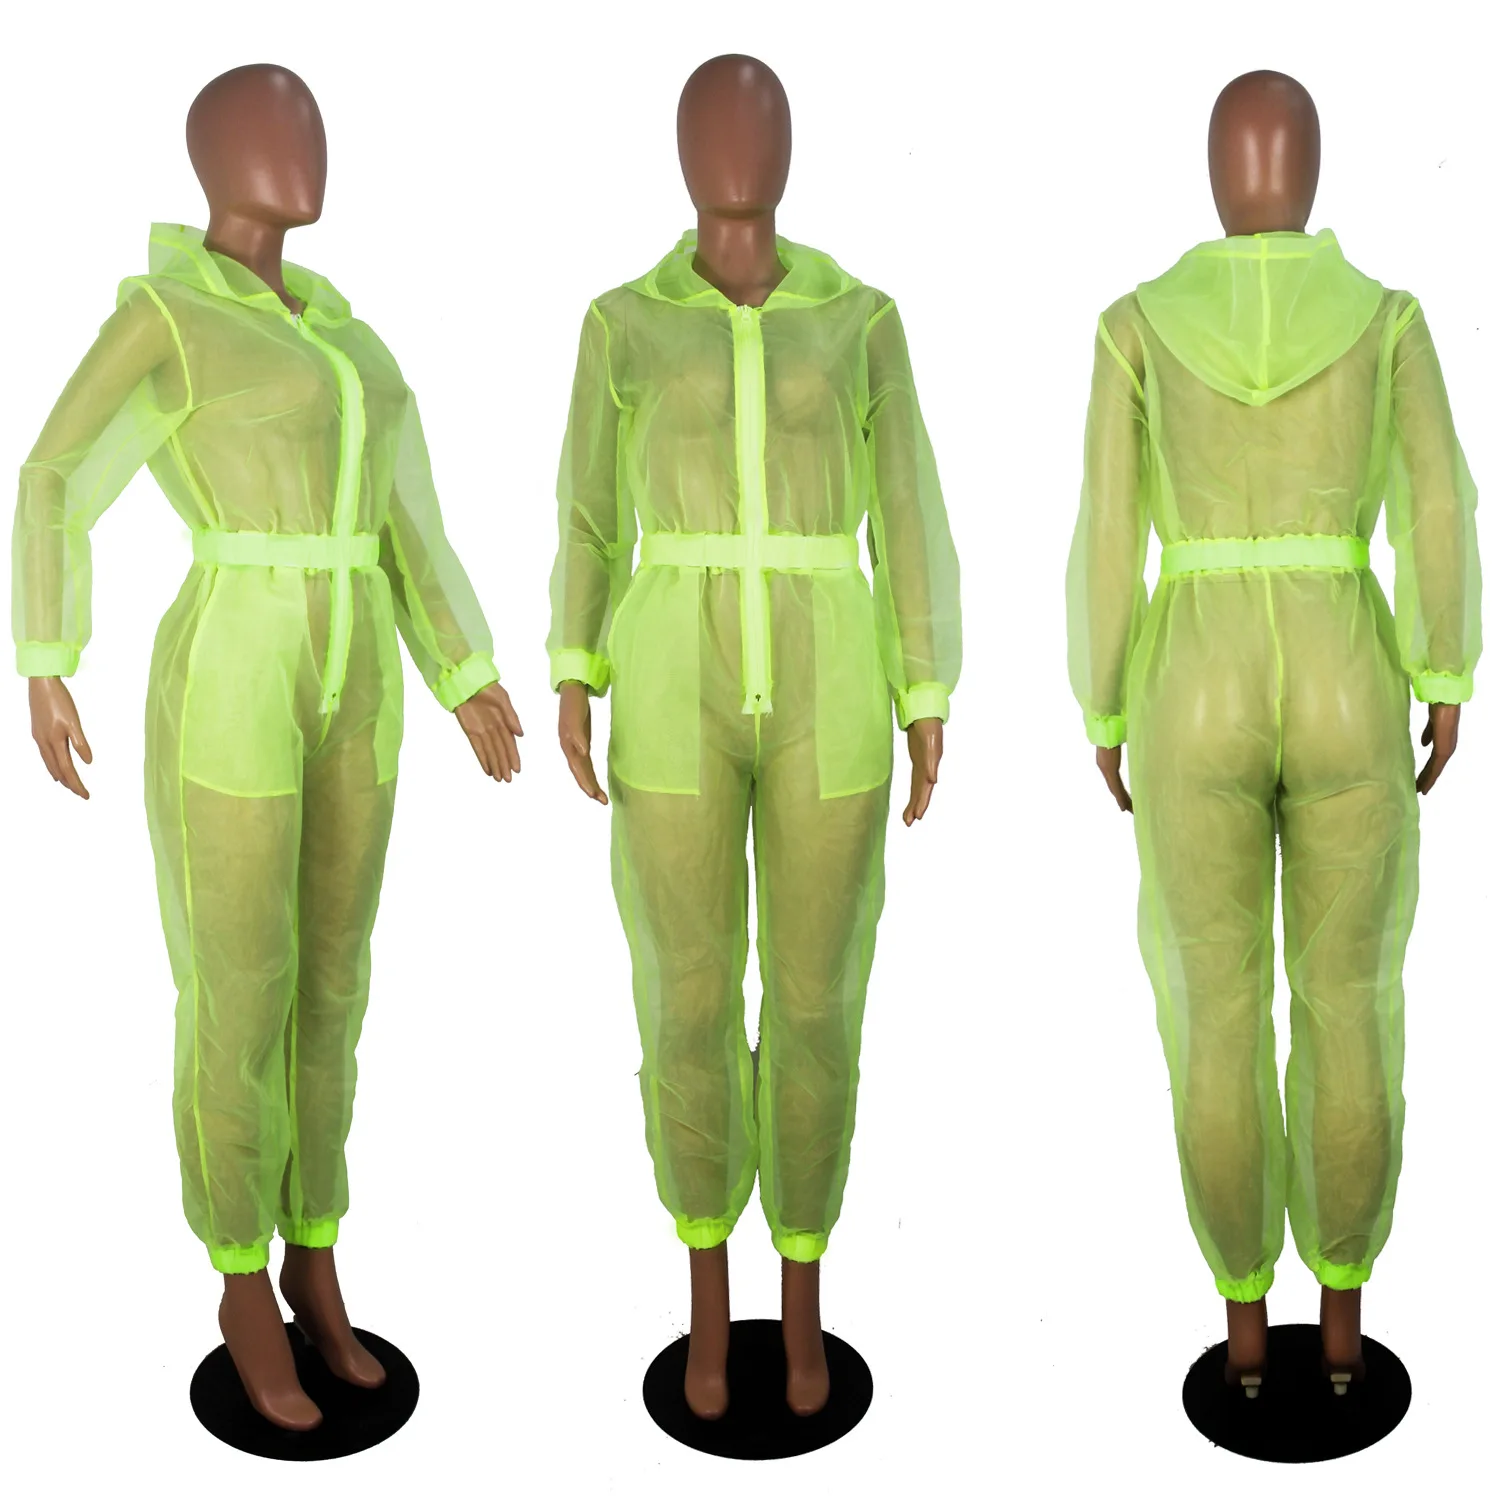 

Neon Green Pink Sheer Organza Hooded Jumpsuit Zipper V Neck Long Sleeve Casual Loose Romper Women Sexy Night Club Overalls